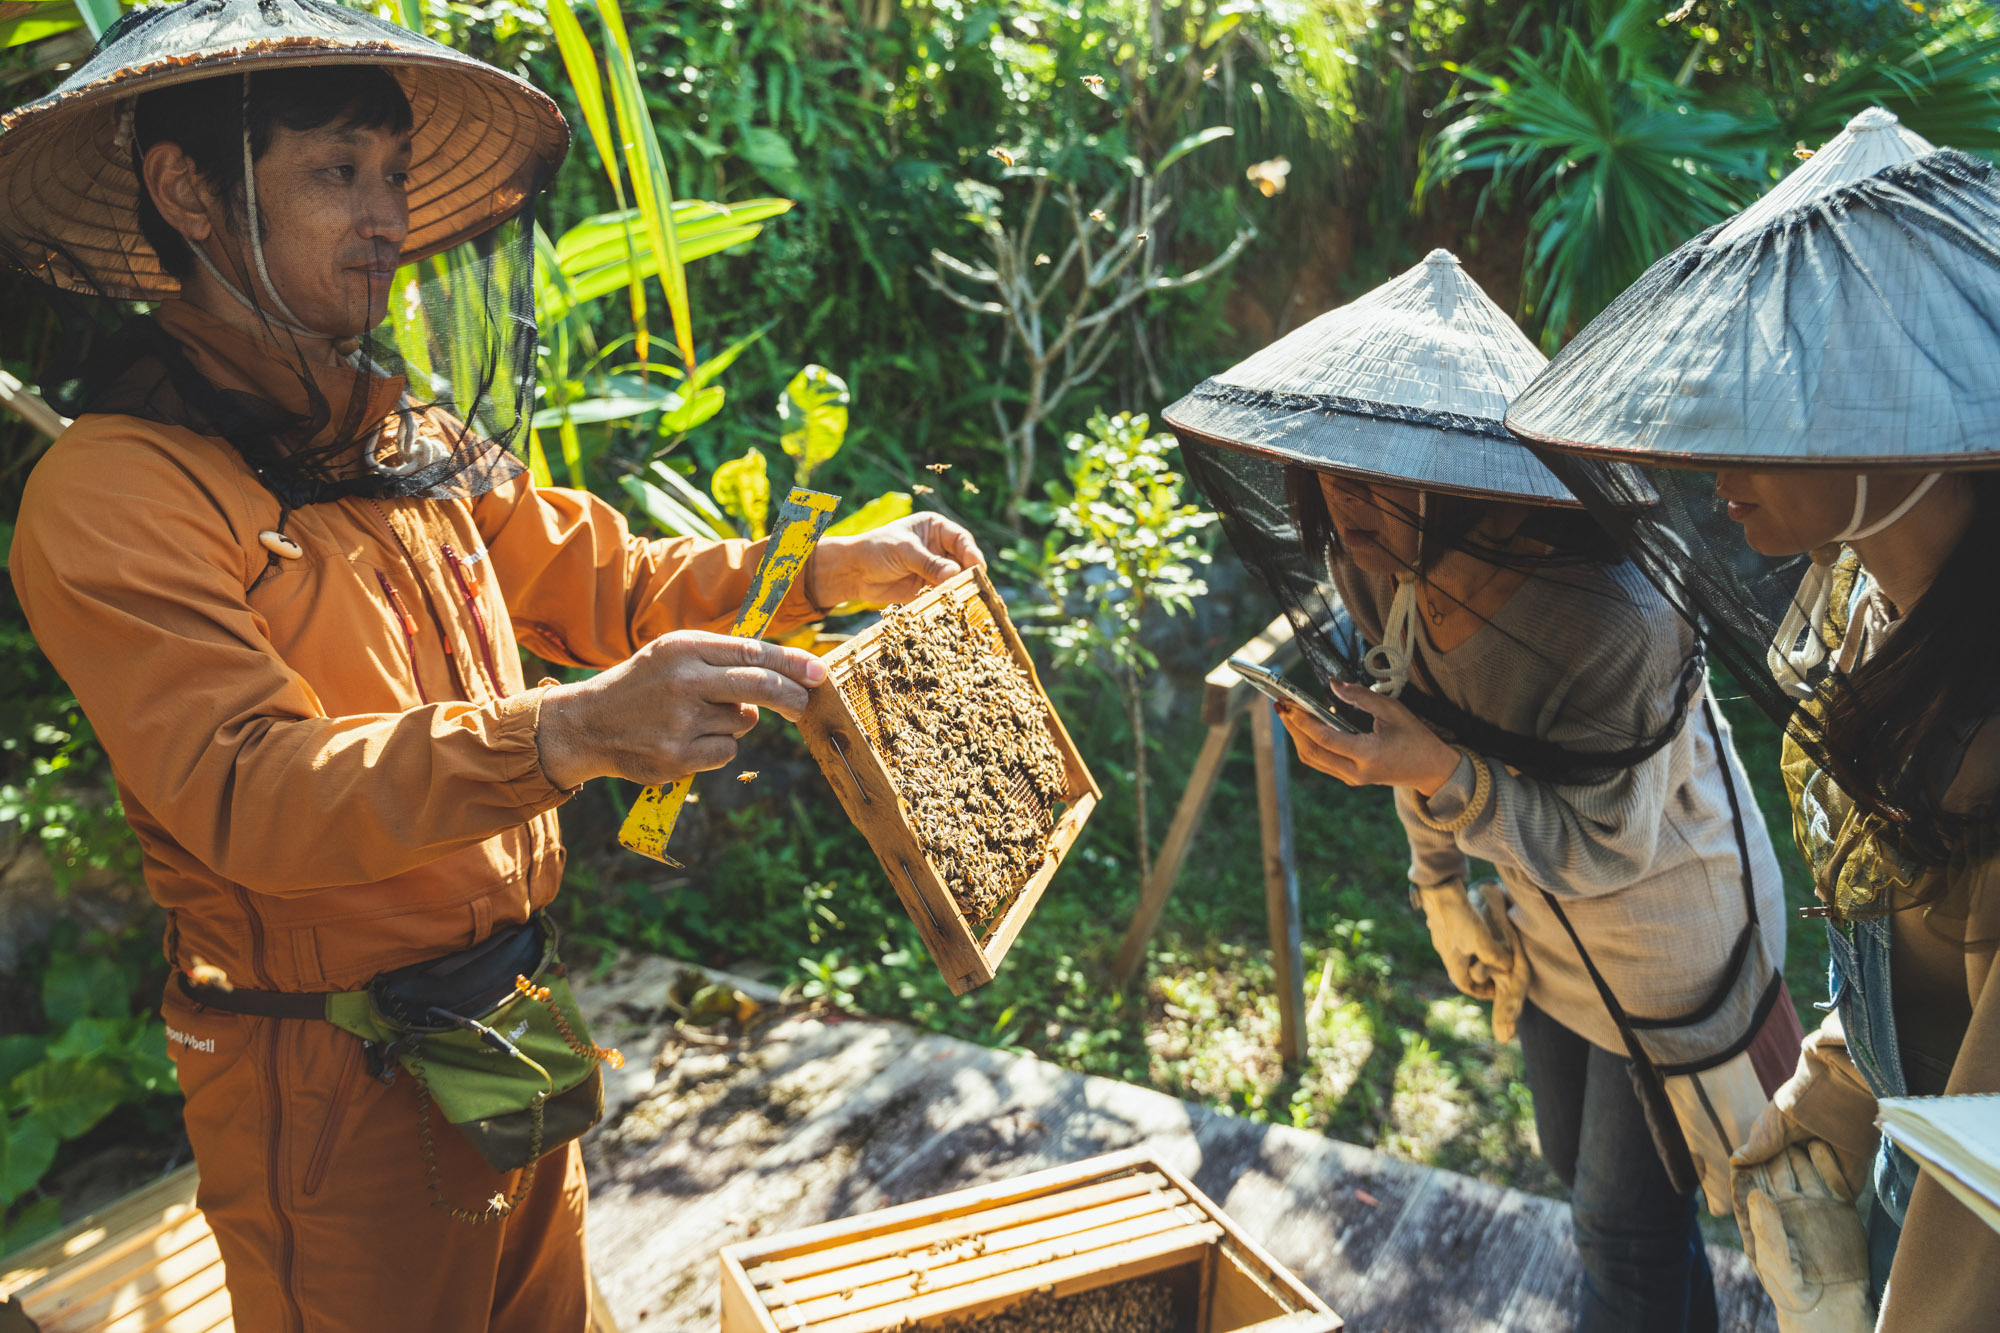 When collecting honey, it is important to wear a protective mask. A mask attached to a bamboo hat with a large brim is good for ventilation and makes working easier.